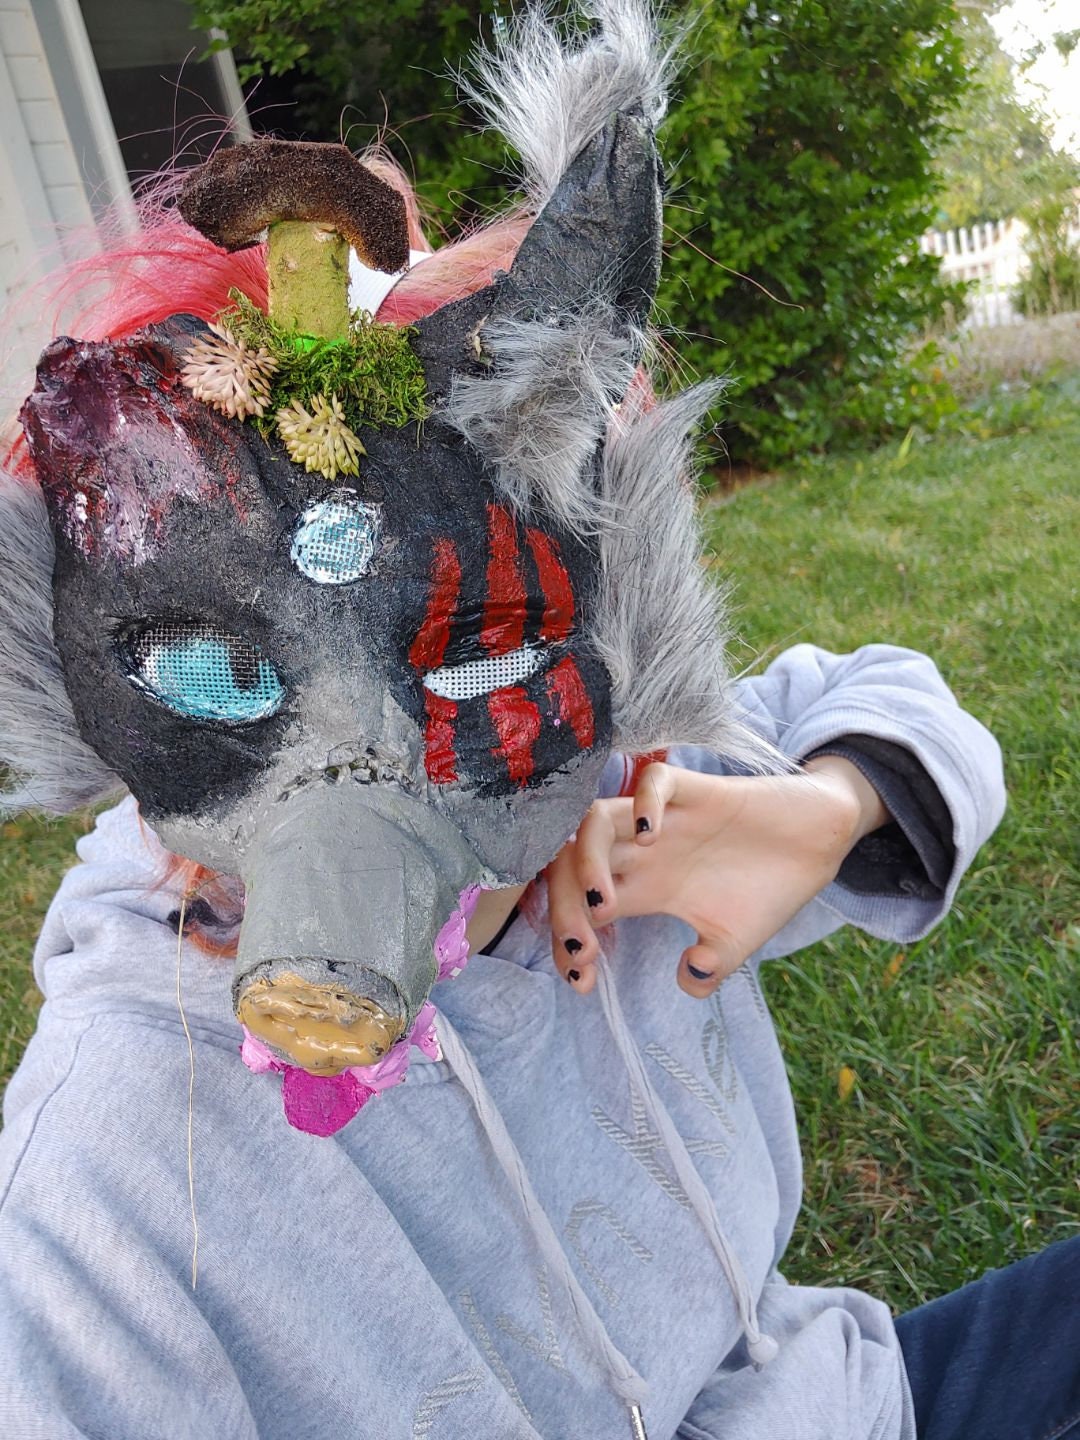 Gray wolf therian mask